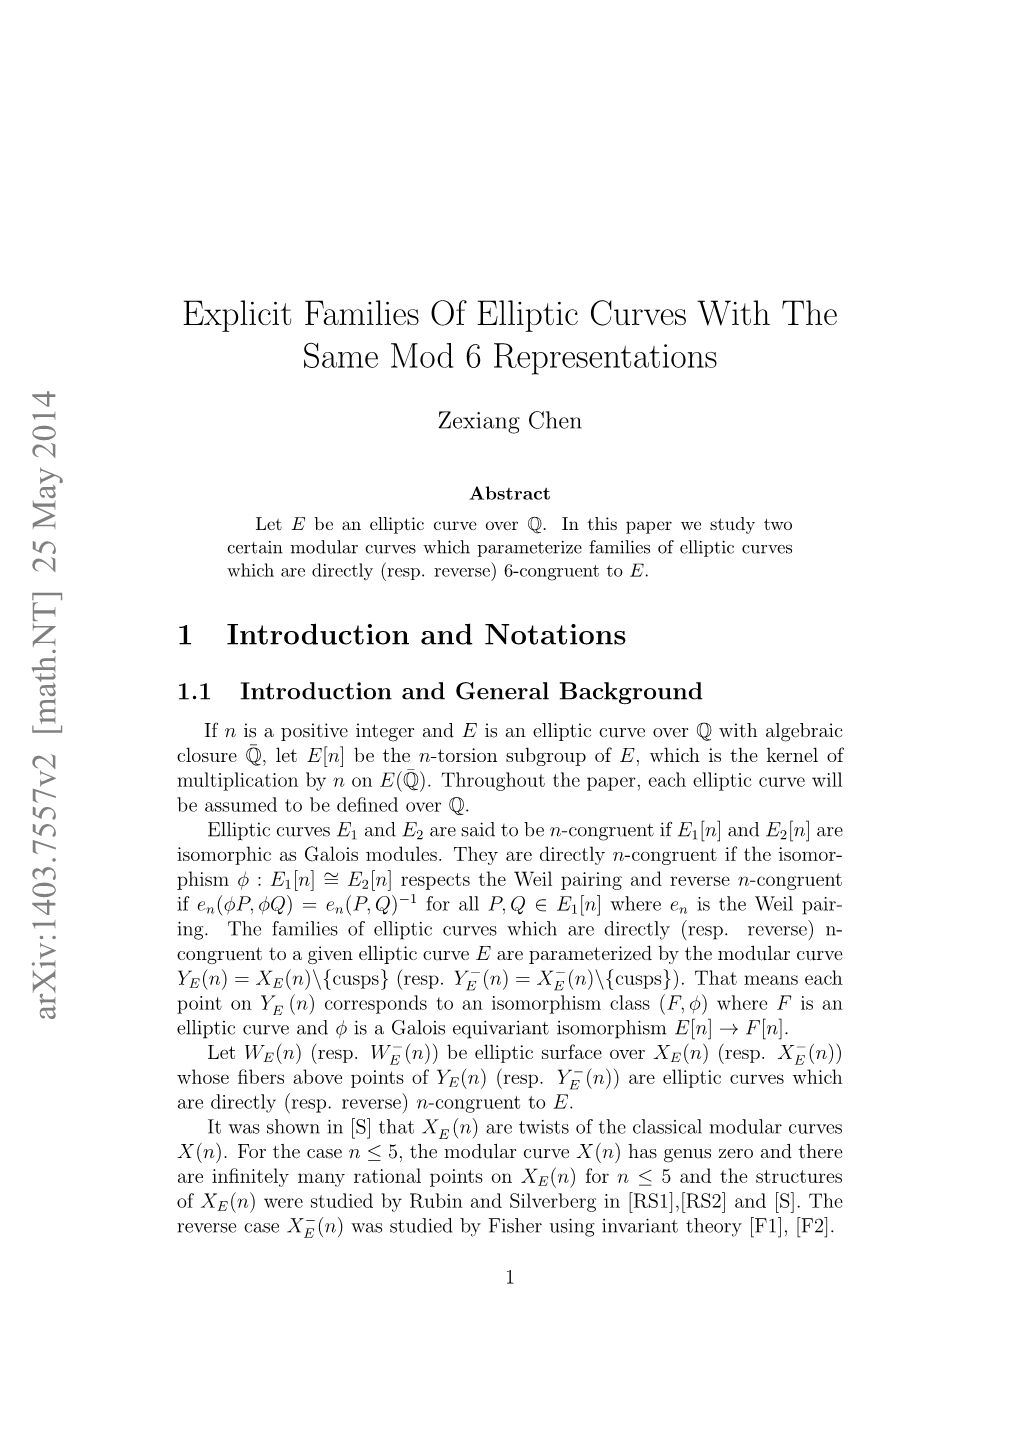 Explicit Families of Elliptic Curves with the Same Mod 6